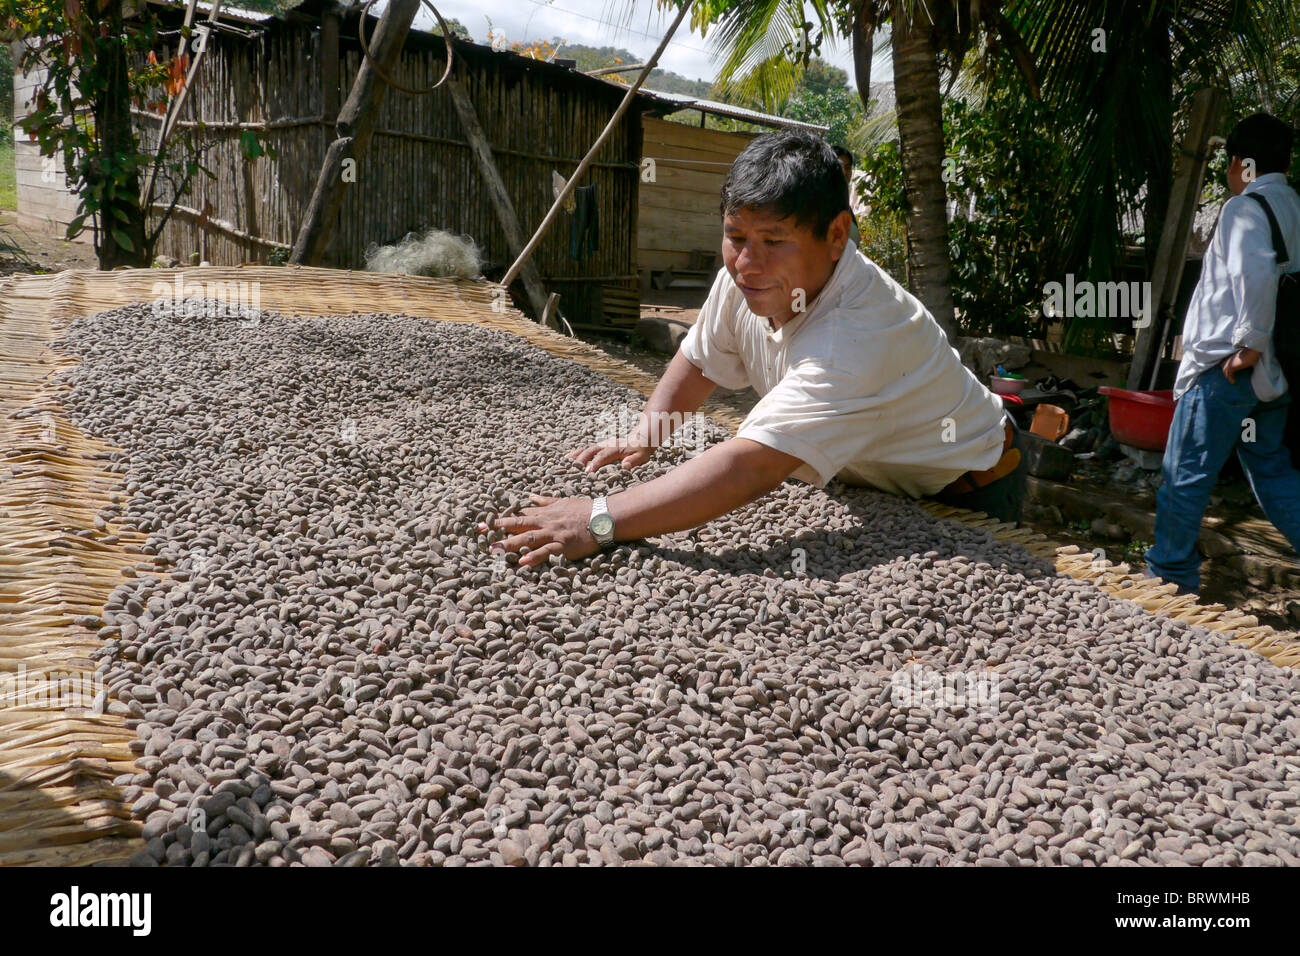 BOLIVIA ECOTOPS projects in Alto Beni. Estamislao Quispe drying cacao beans, Remolinos. photograph by Sean Sprague Stock Photo